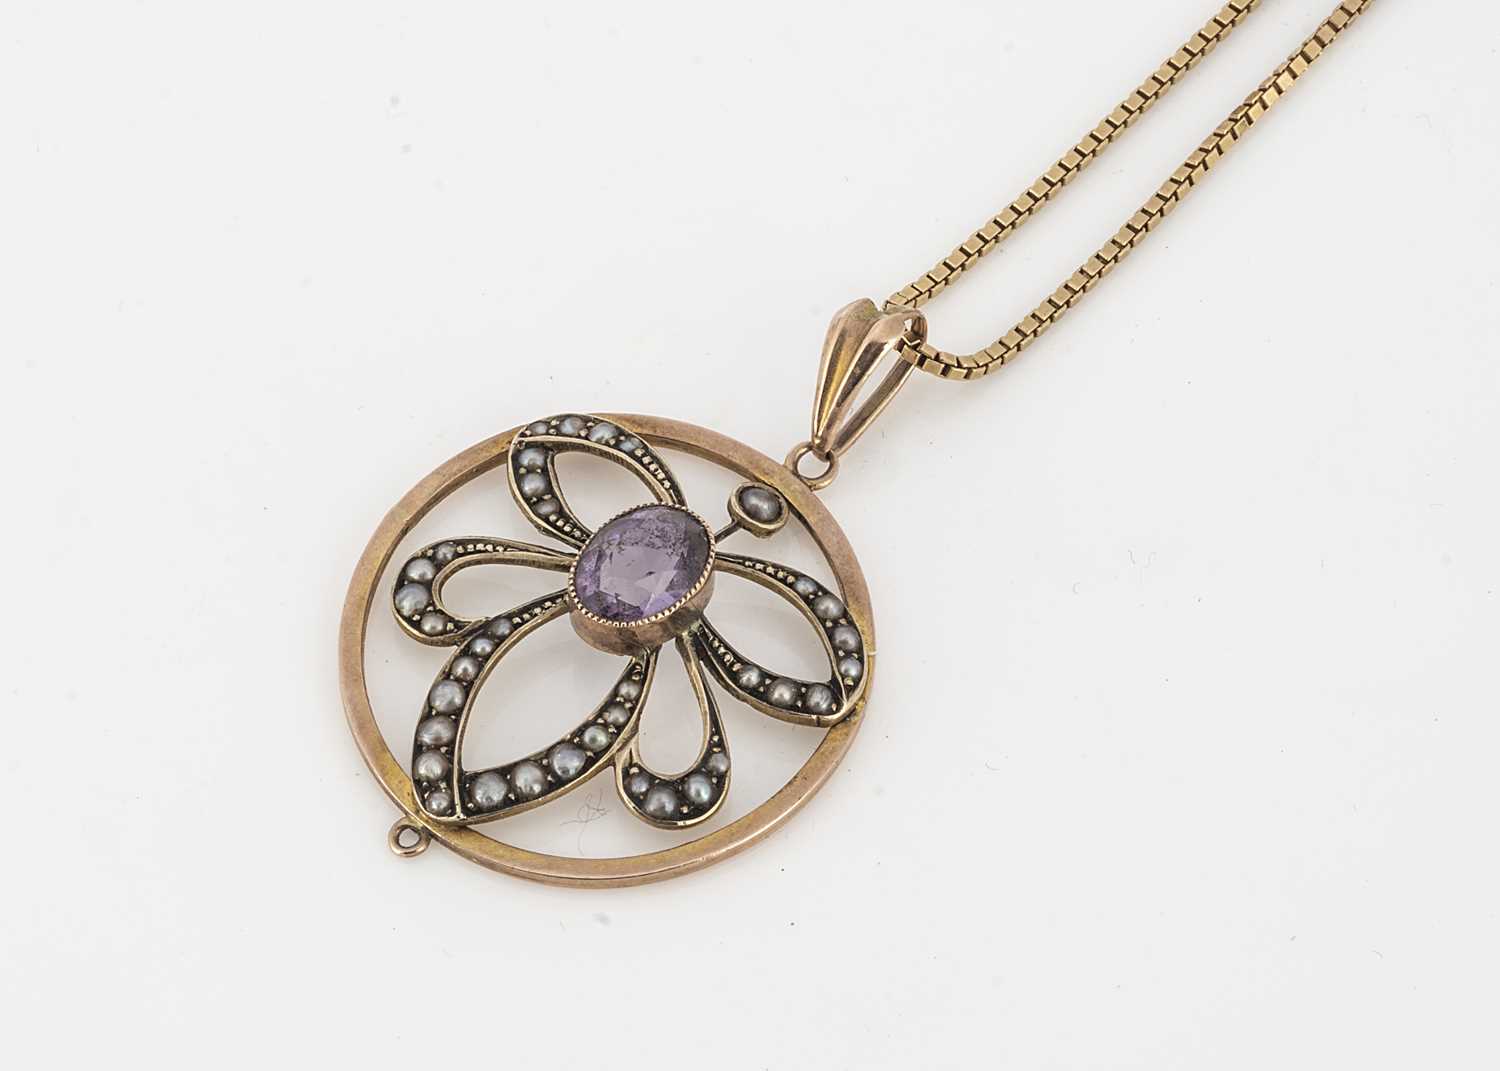 Lot 54 - An Edwardian 9ct gold amethyst and seed pearl drop openwork pendant